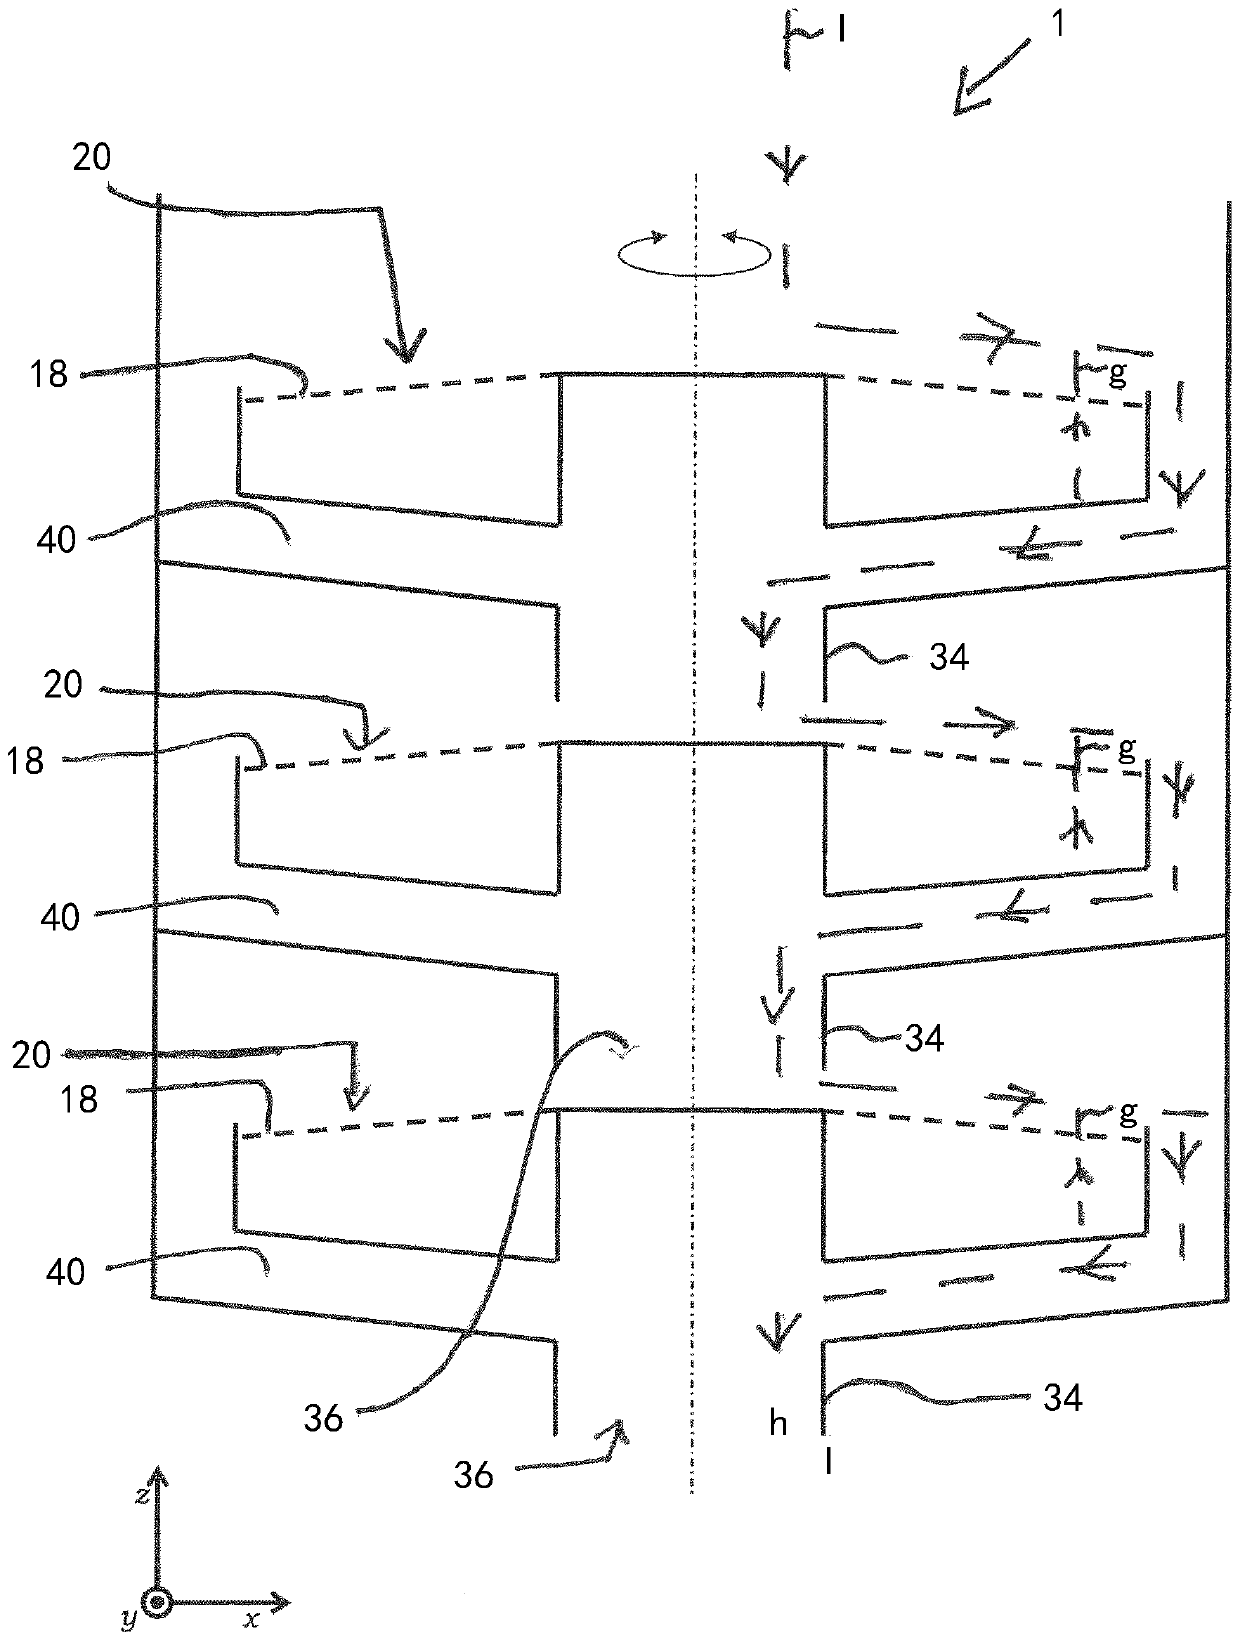 Fluid contact tray particularly for the use in an offshore fractionation column